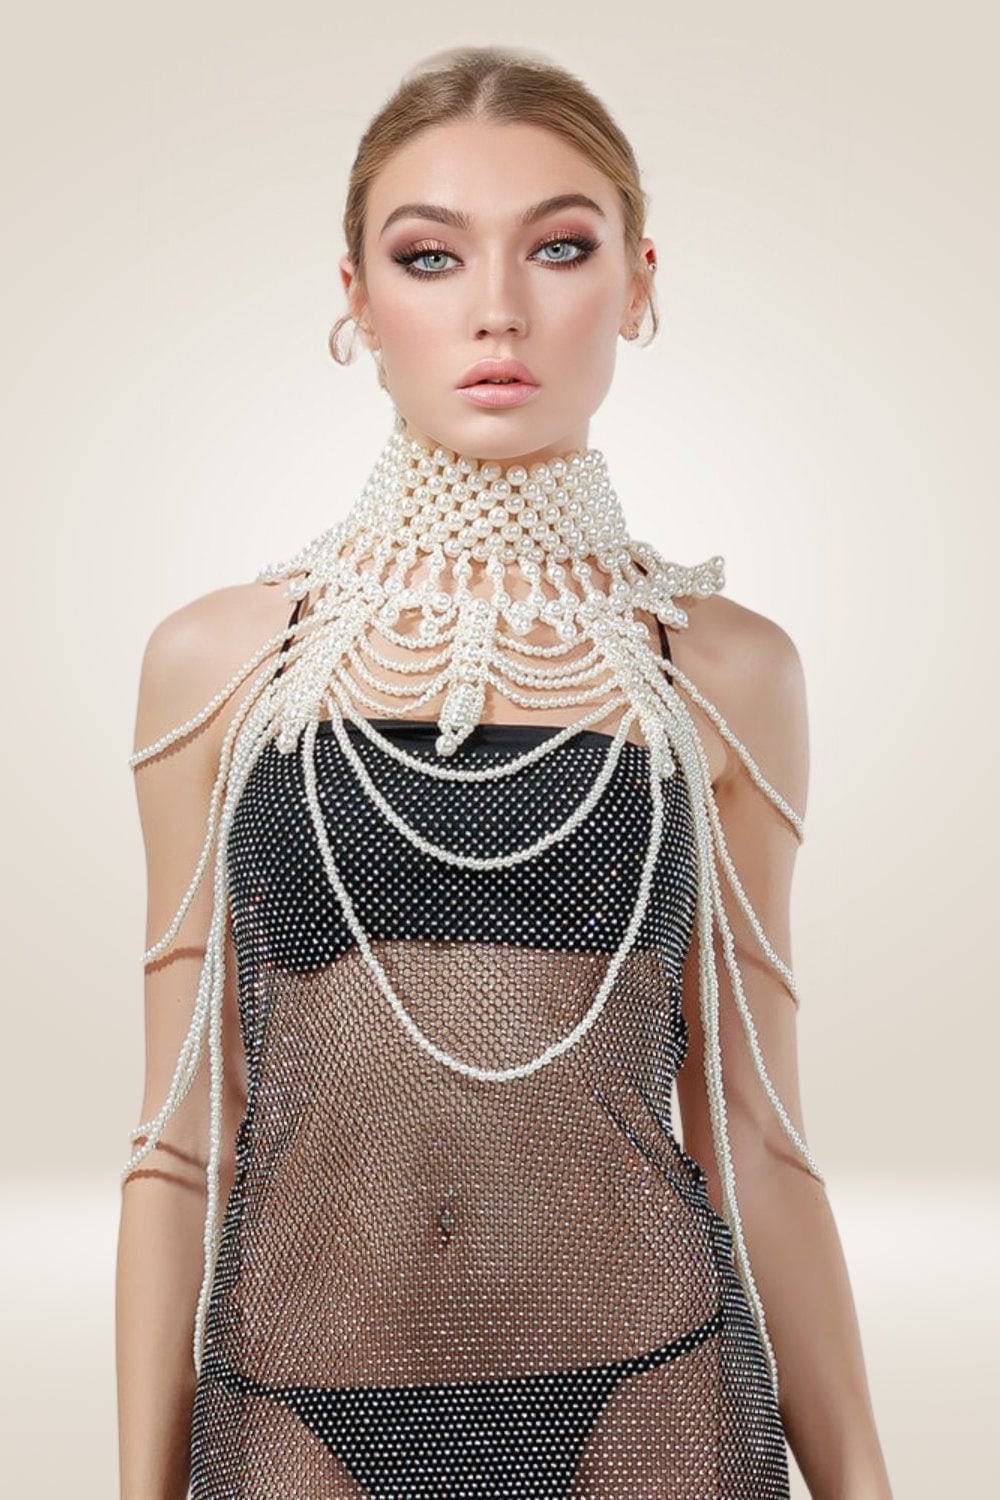 Pearl Body Chain Choker Layered Necklaces - TGC Boutique - Body Necklace